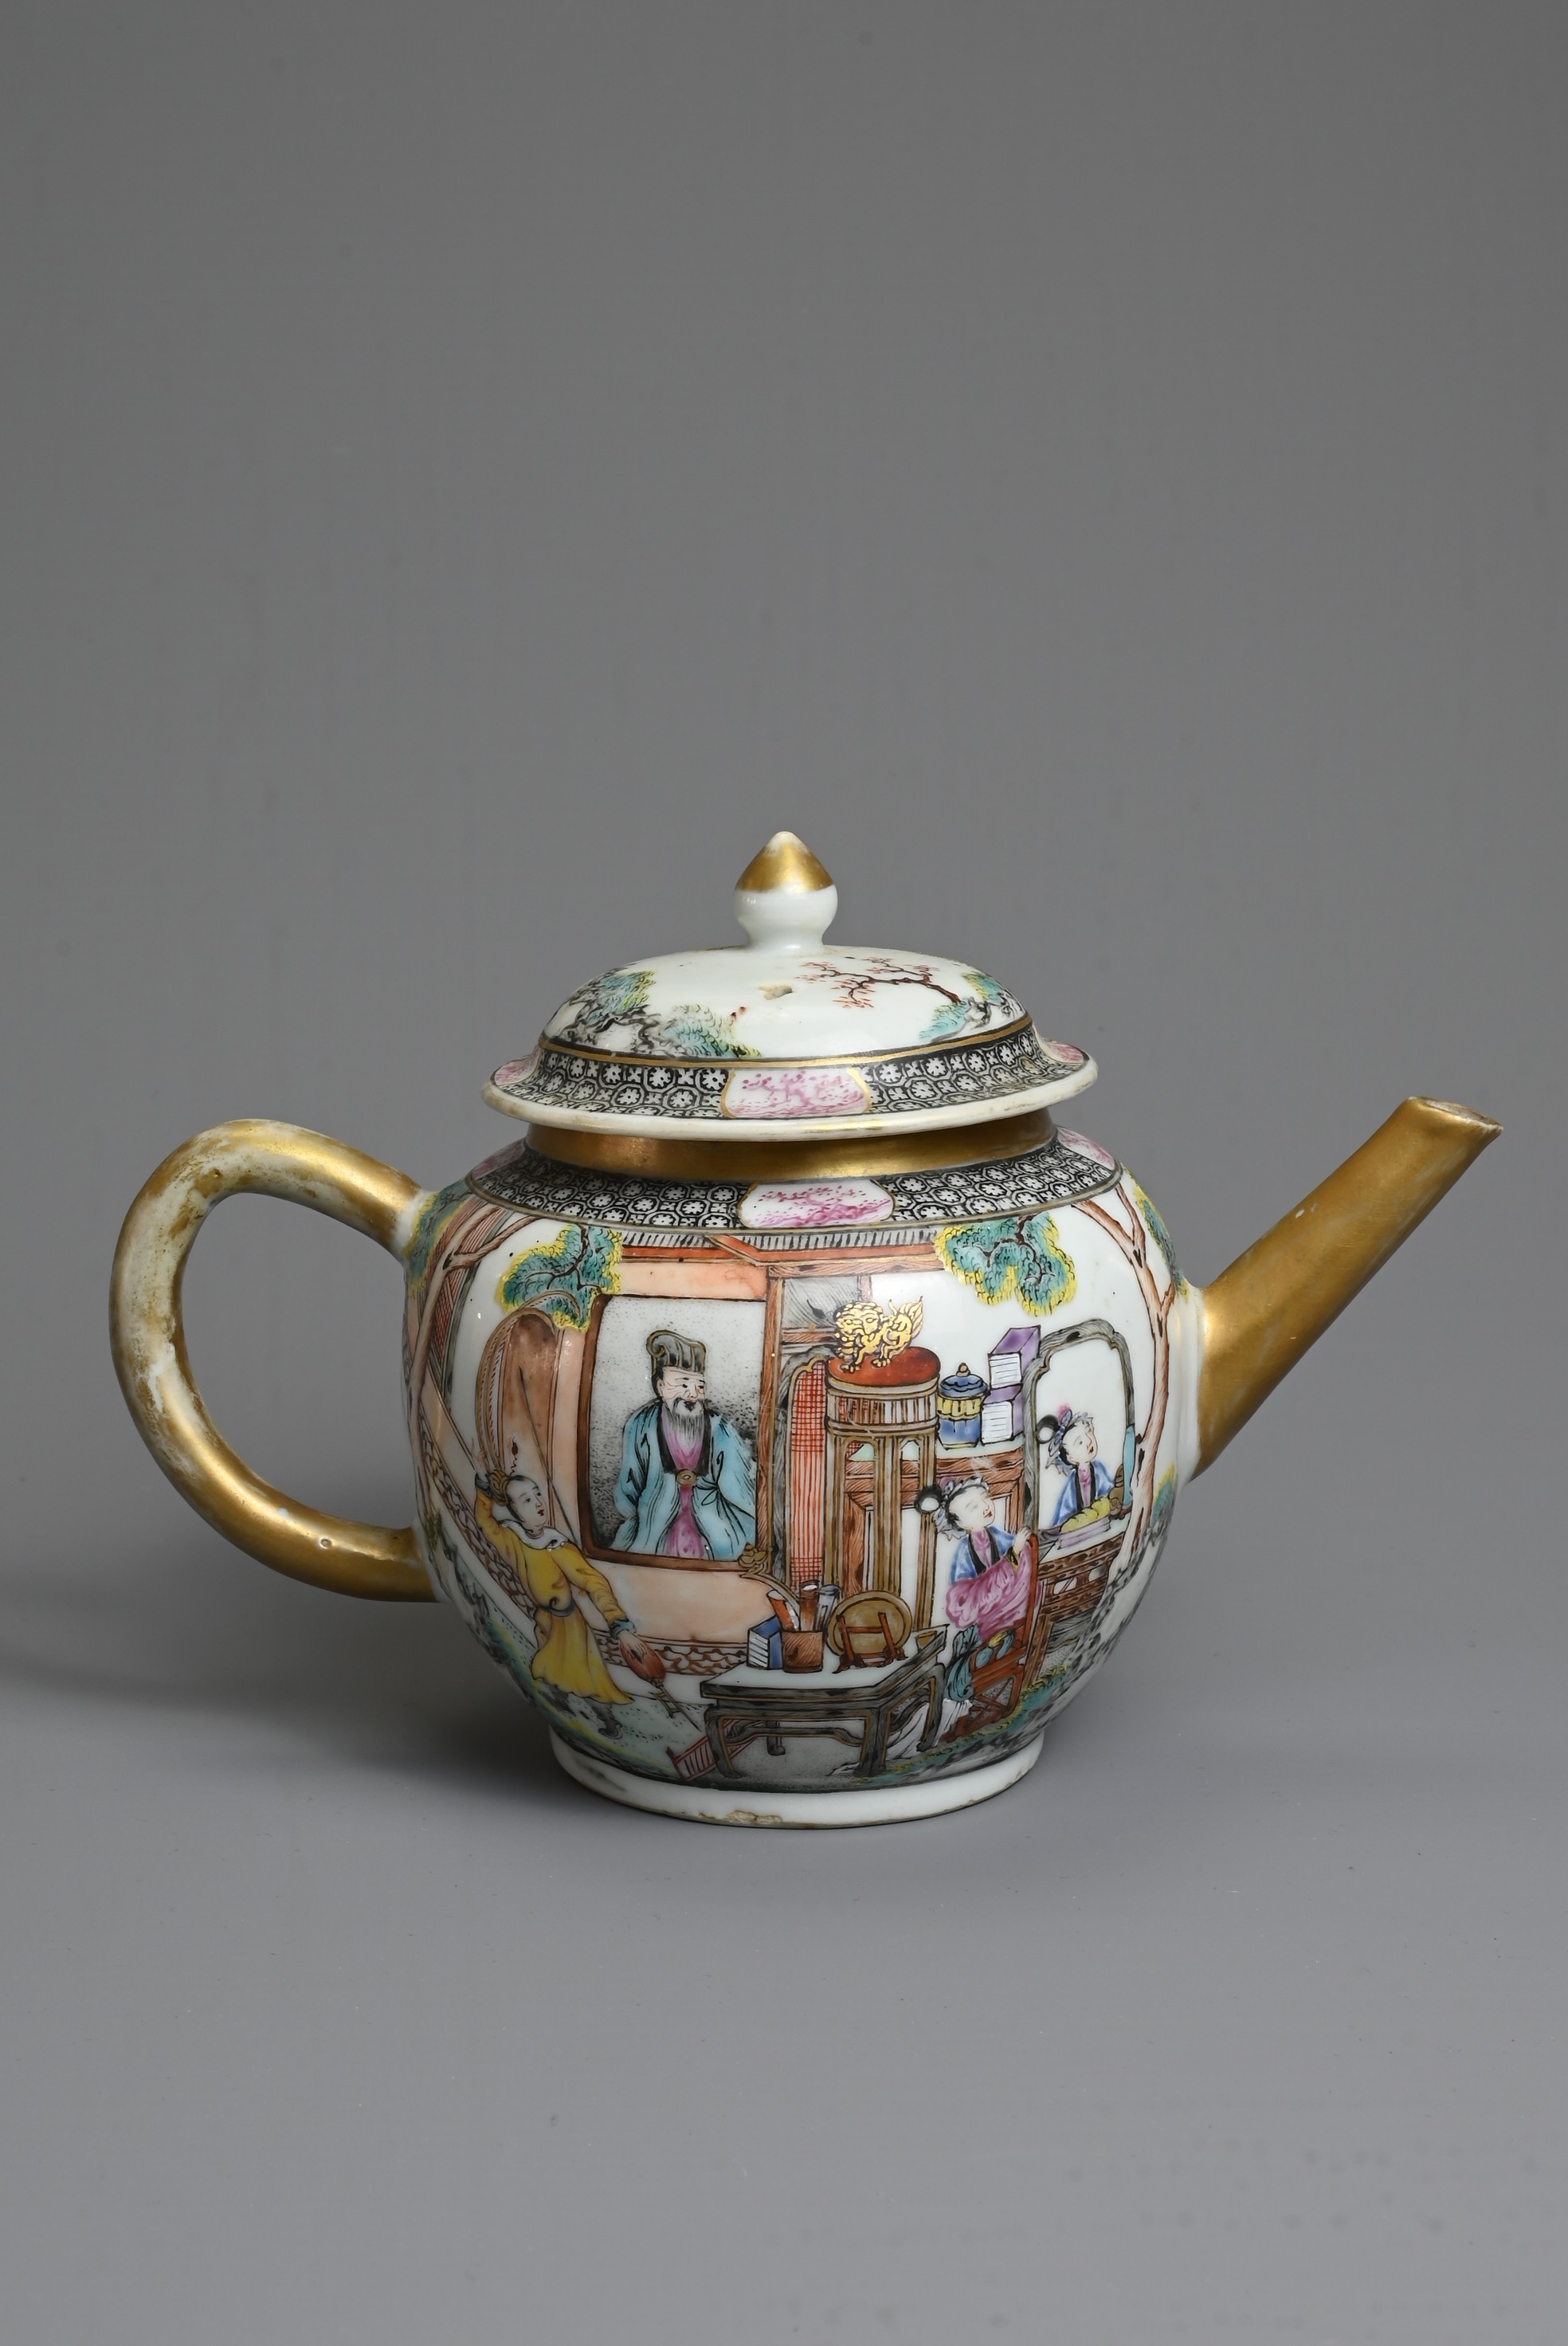 A FINE CHINESE FAMILLE ROSE PORCELAIN TEAPOT, 18TH CENTURY - Image 4 of 21